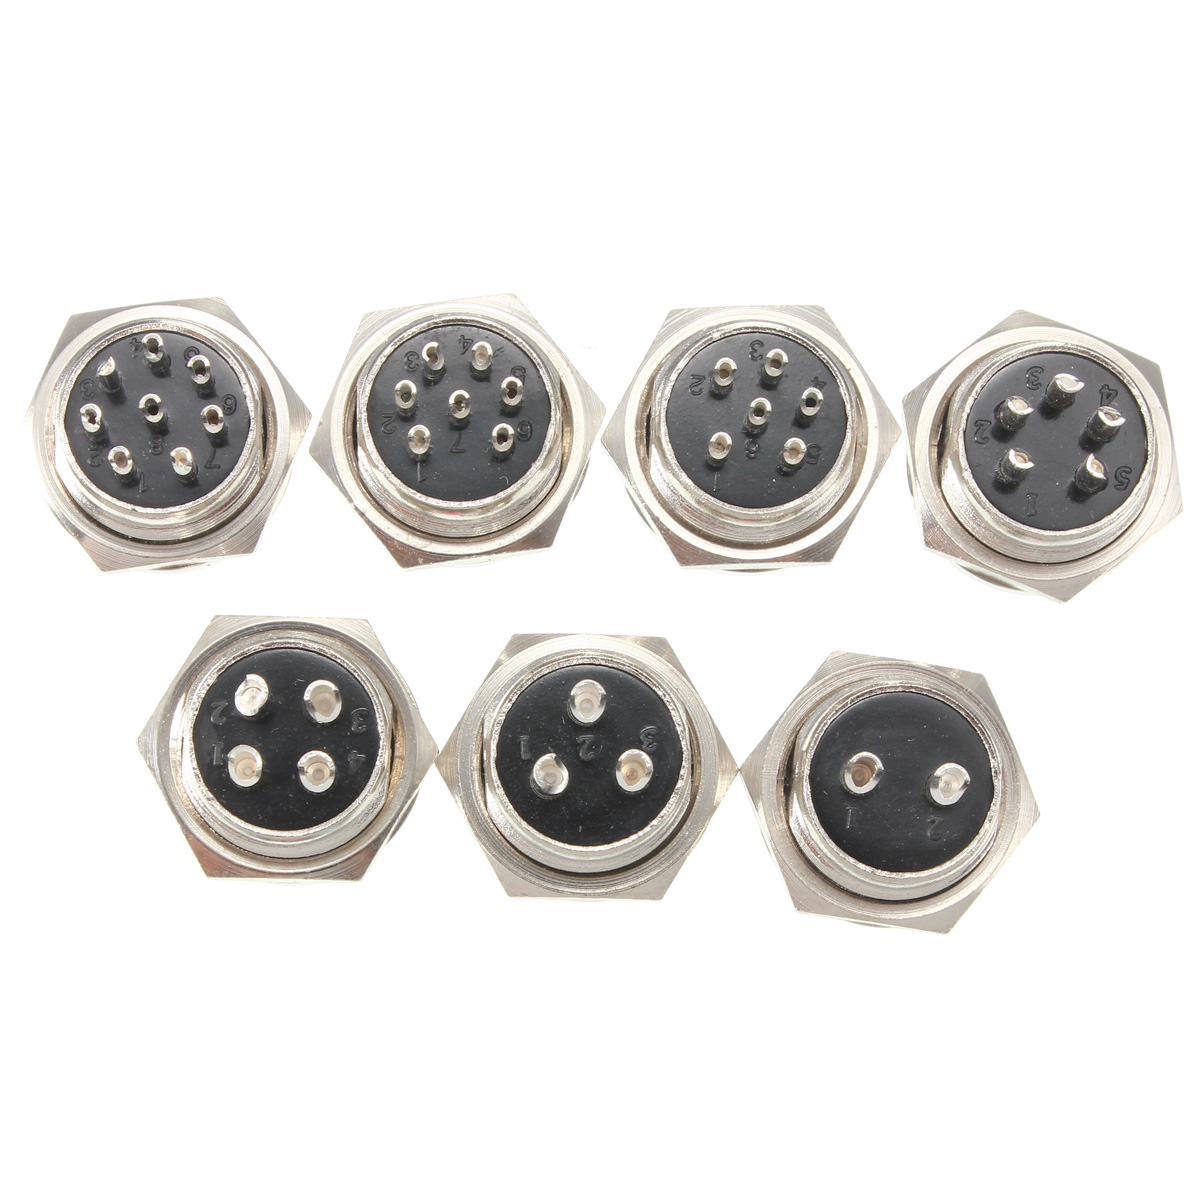 M16-2345678-Pin-Screw-Type-Electrical-Aviation-Plug-Socket-Connector-Aviation-Connector-Plug-1333374-5